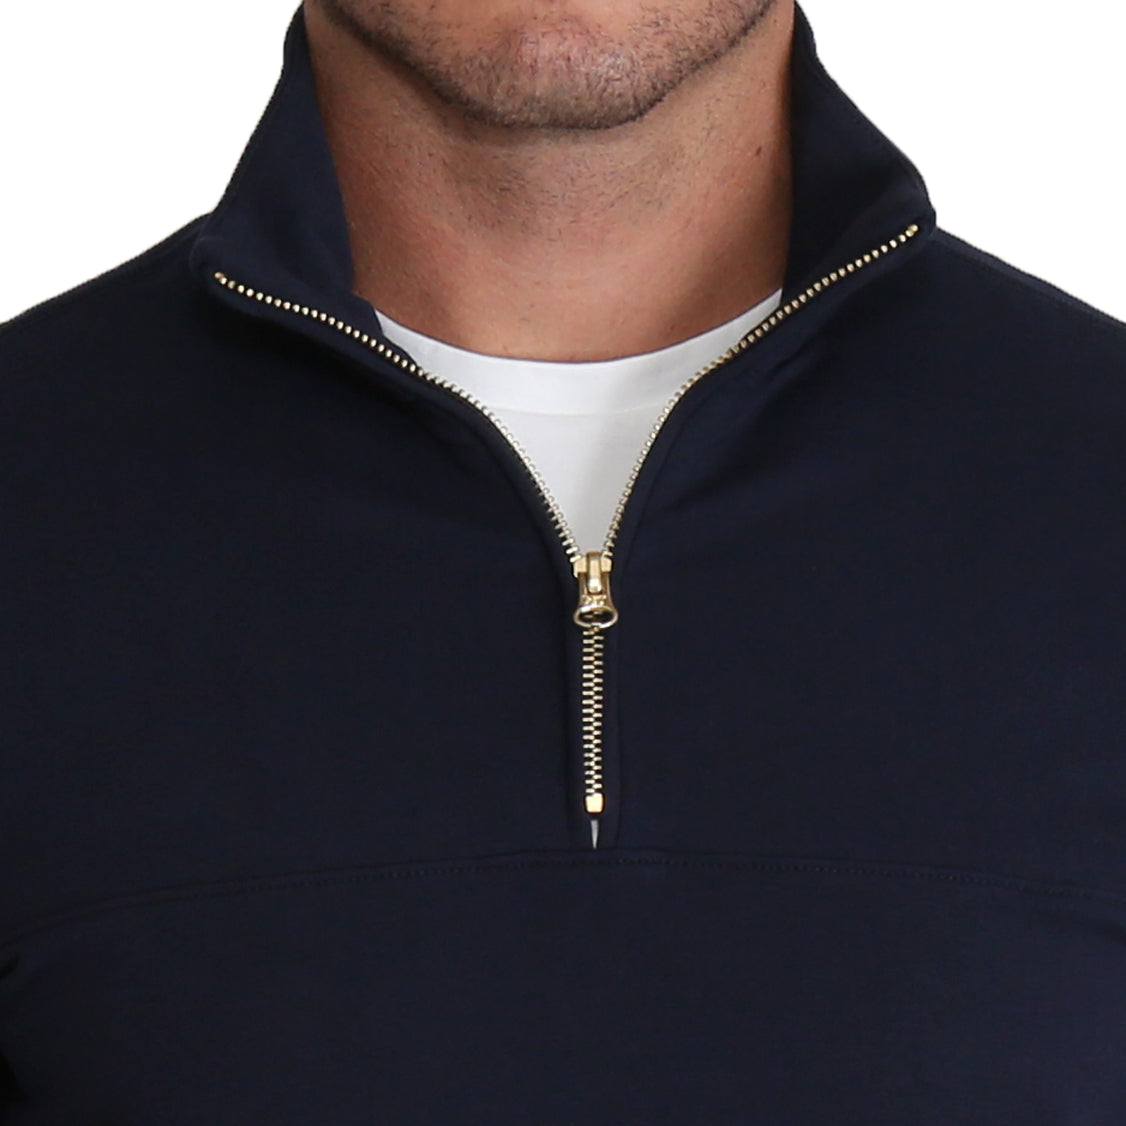 Quarter Zip - Solid Navy - State and Liberty Clothing Company